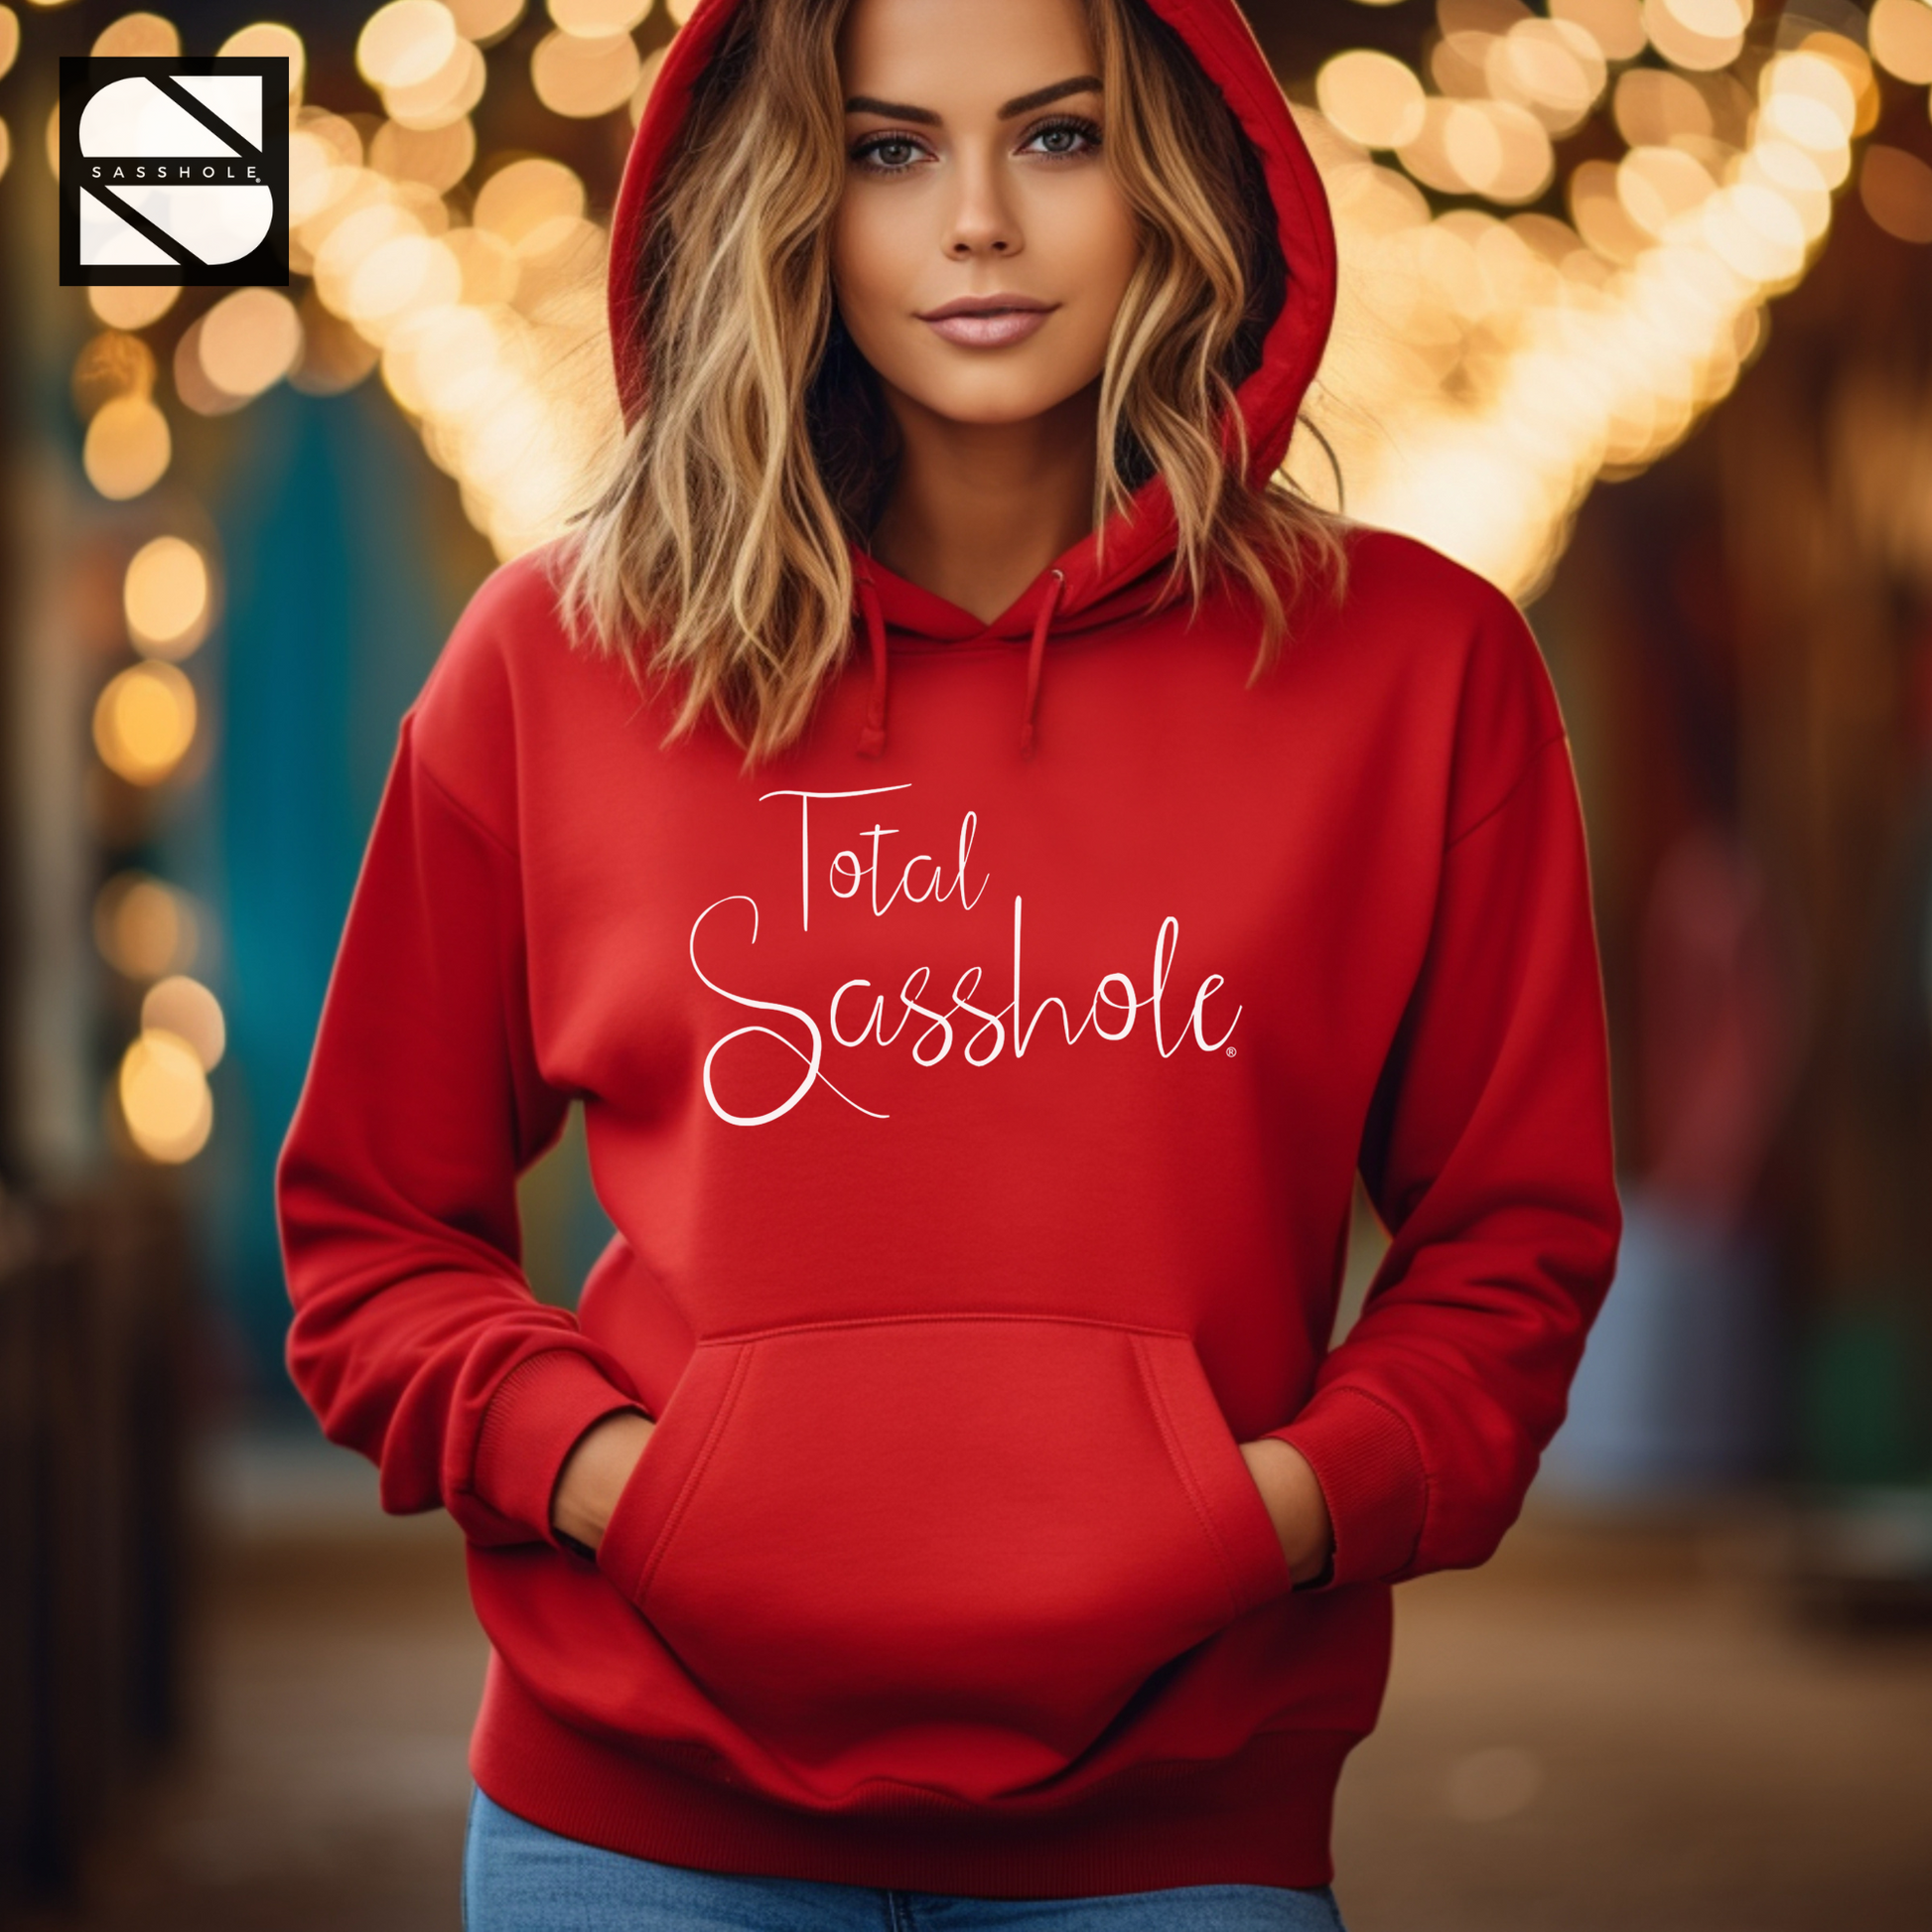 Women's Funny Red Pullover Hoodie